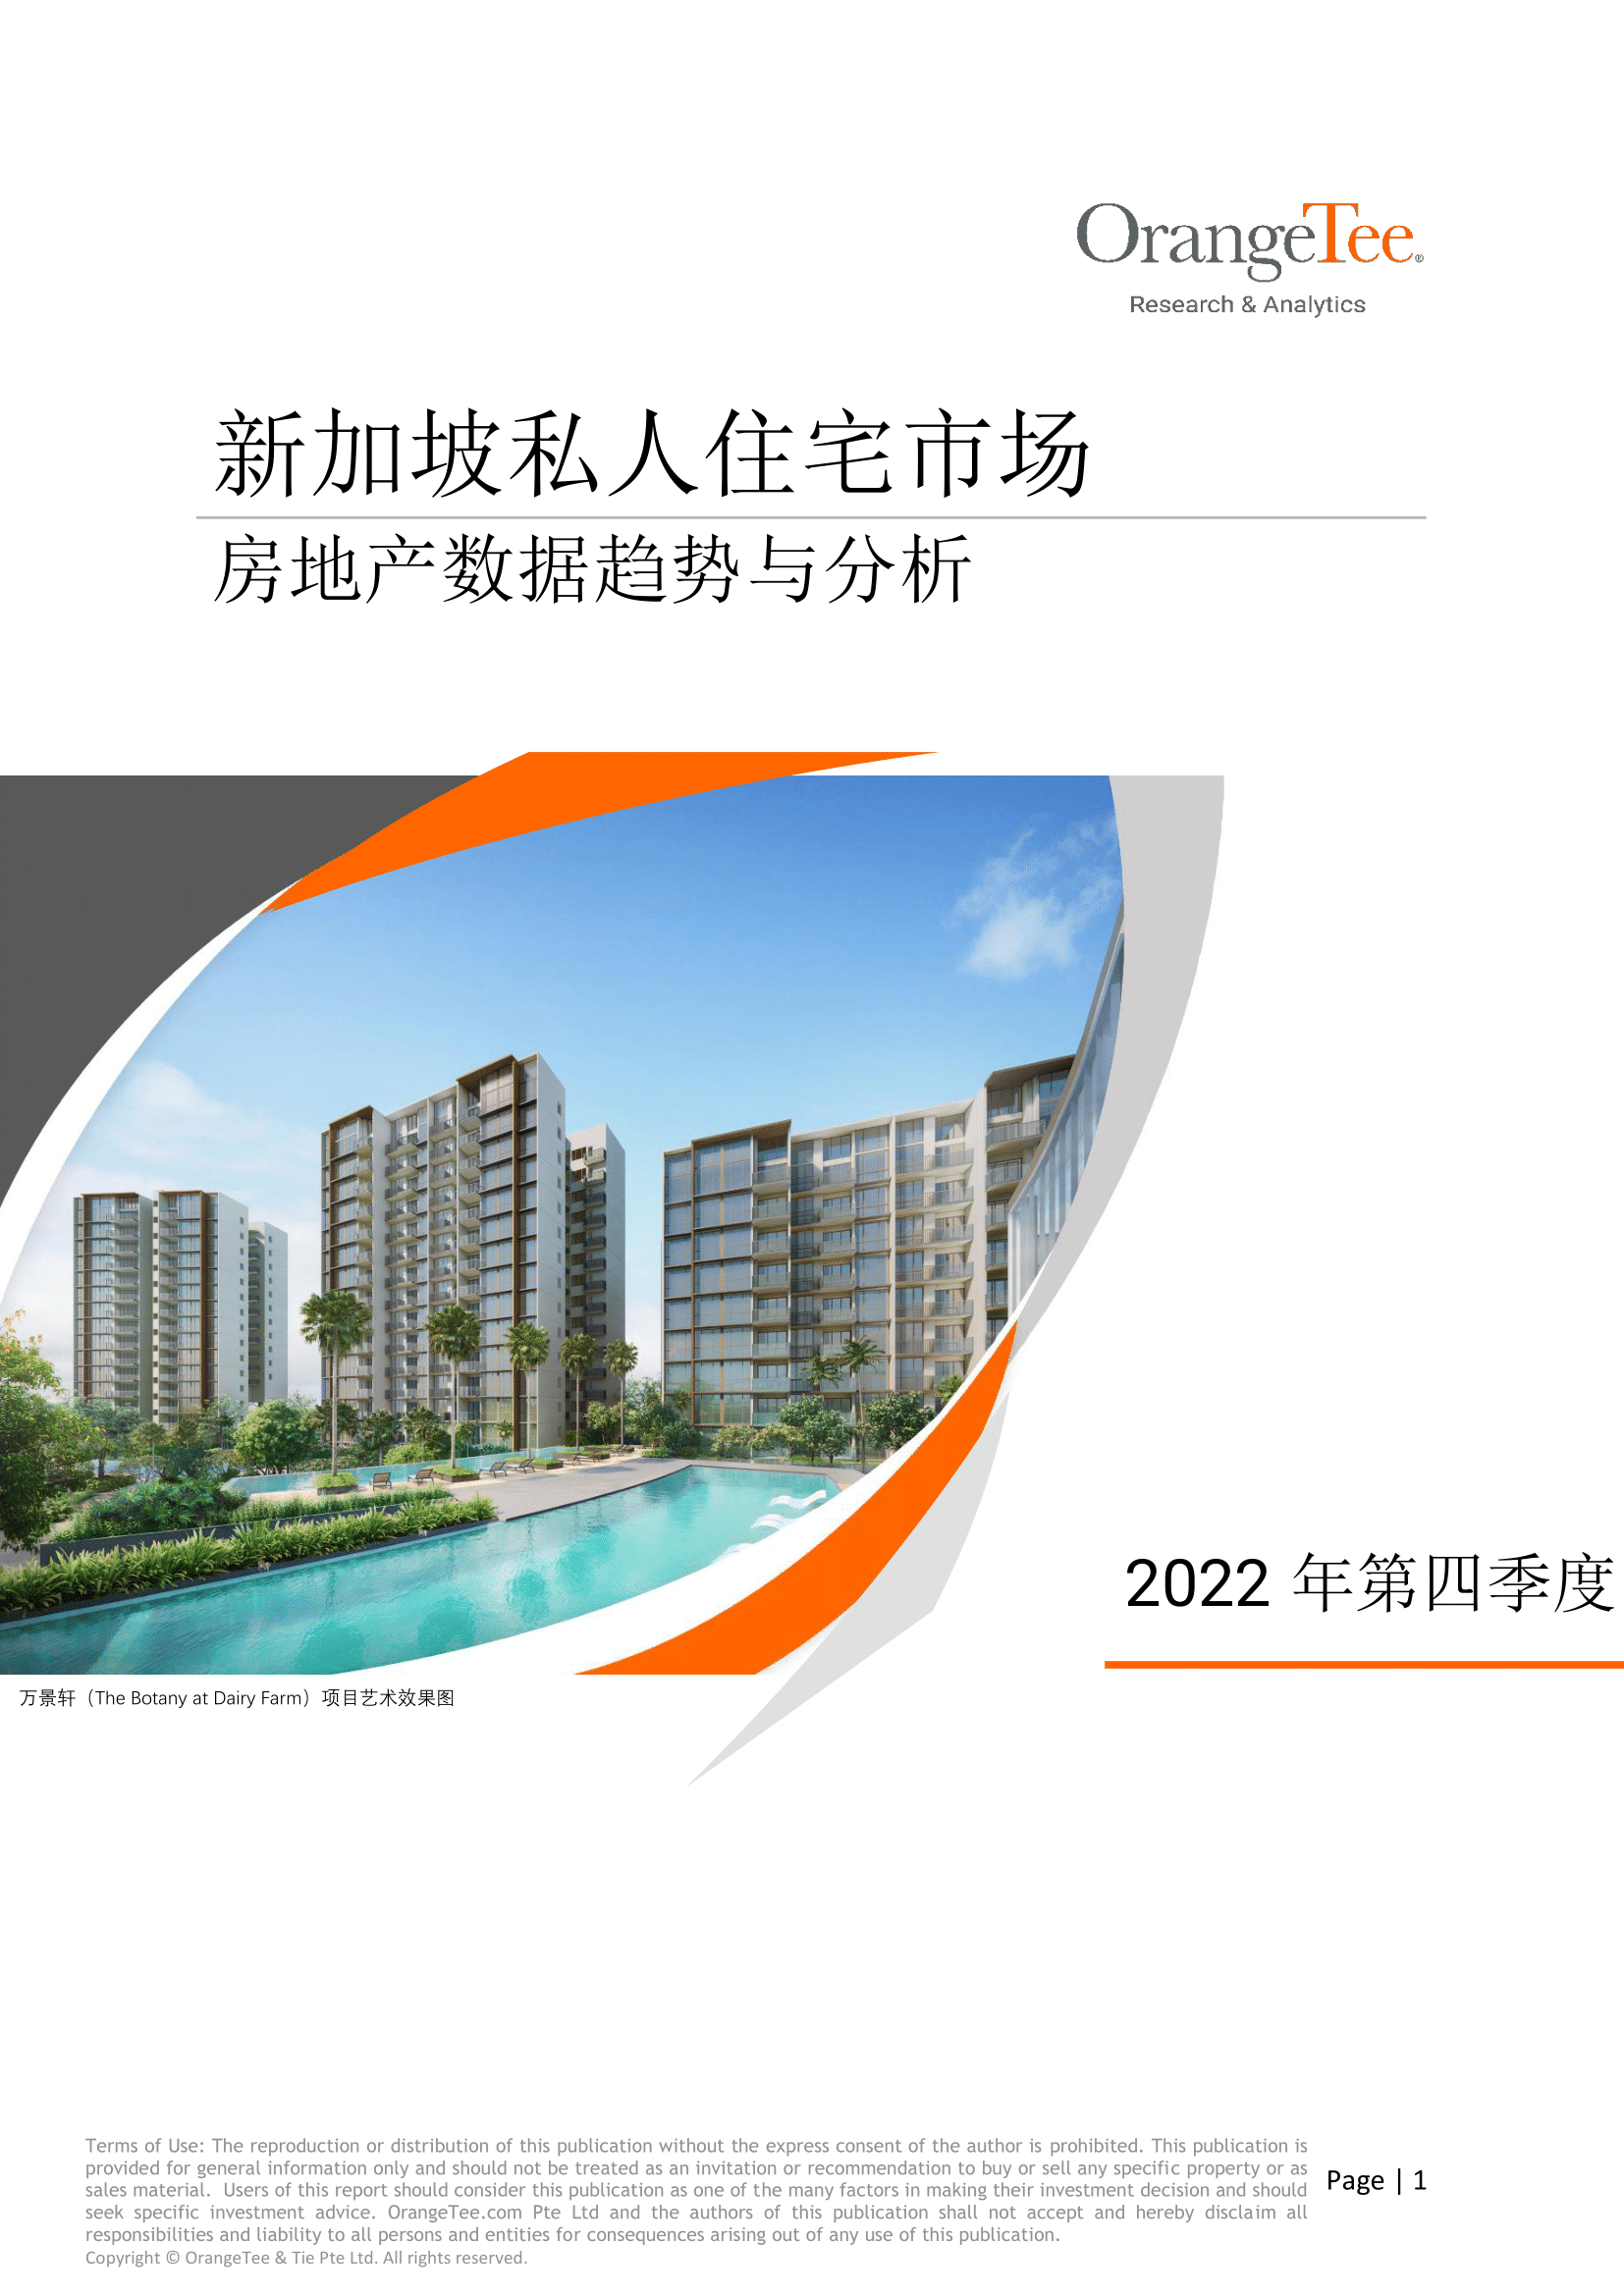 OrangeTee - Private Residential Market Report for Q4 2022 Chinese (1)-1.png